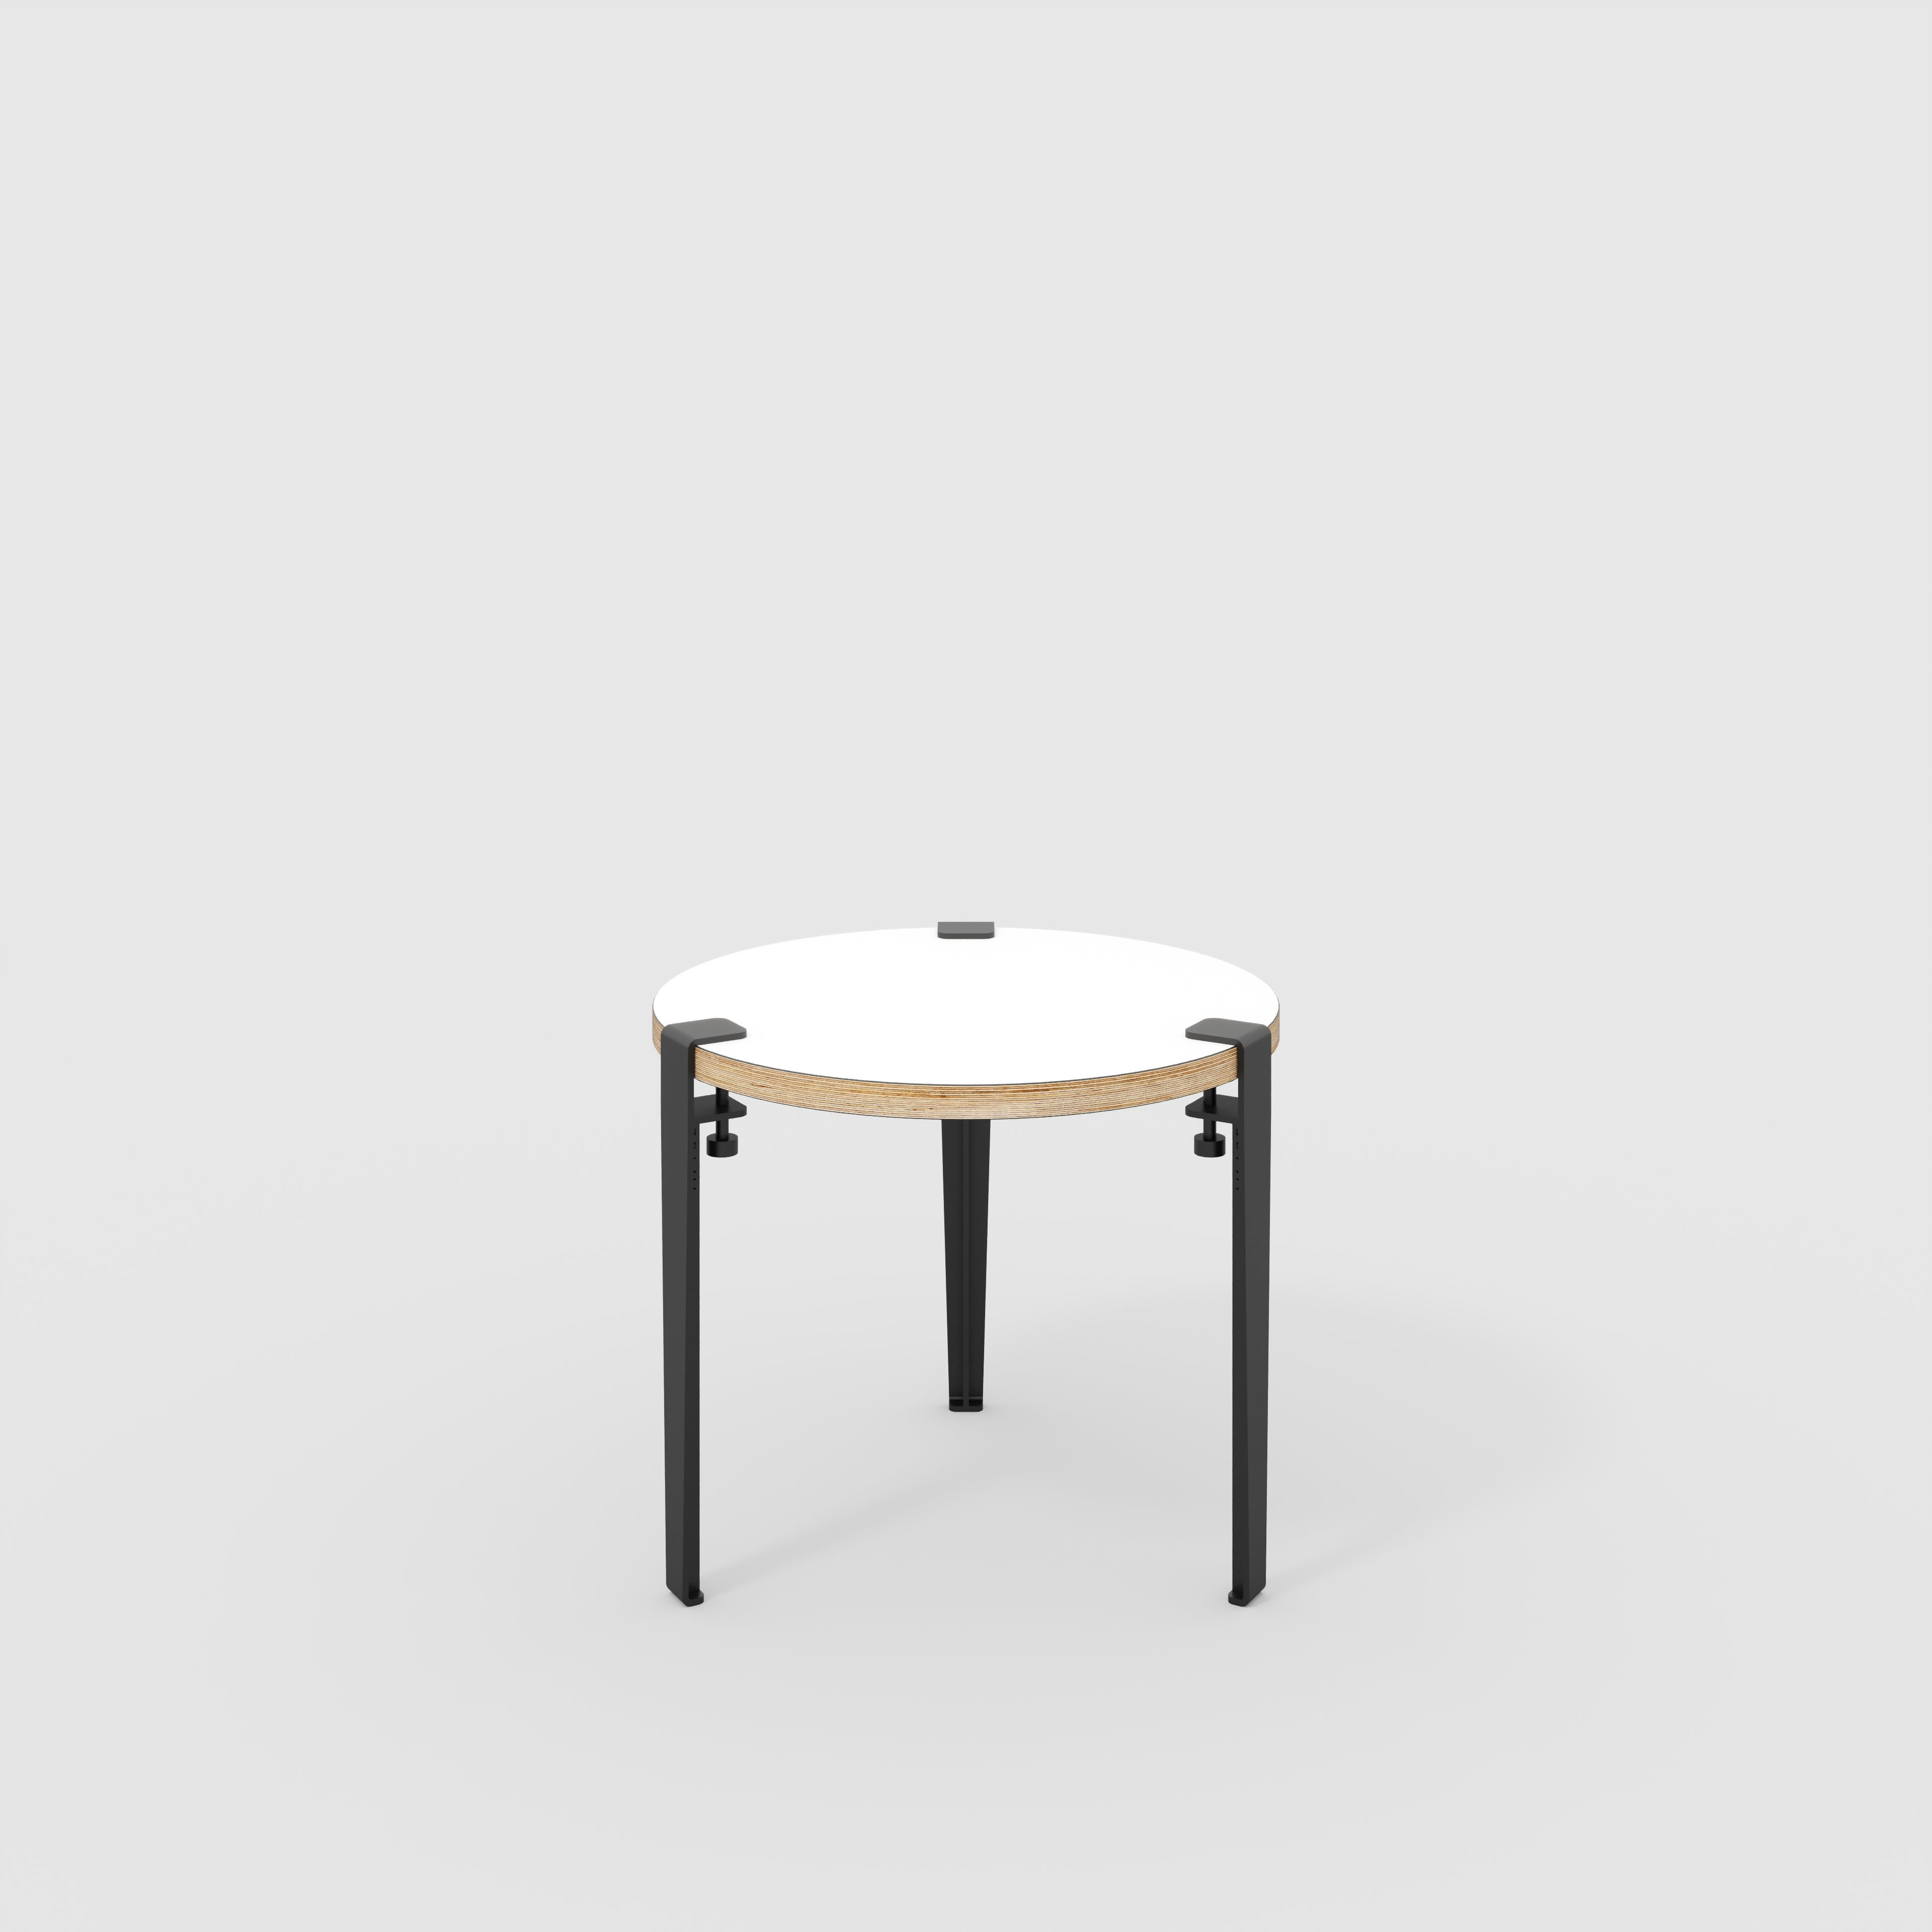 Round Side Table with Black Tiptoe Legs - Formica White - 500(dia) x 430(h)